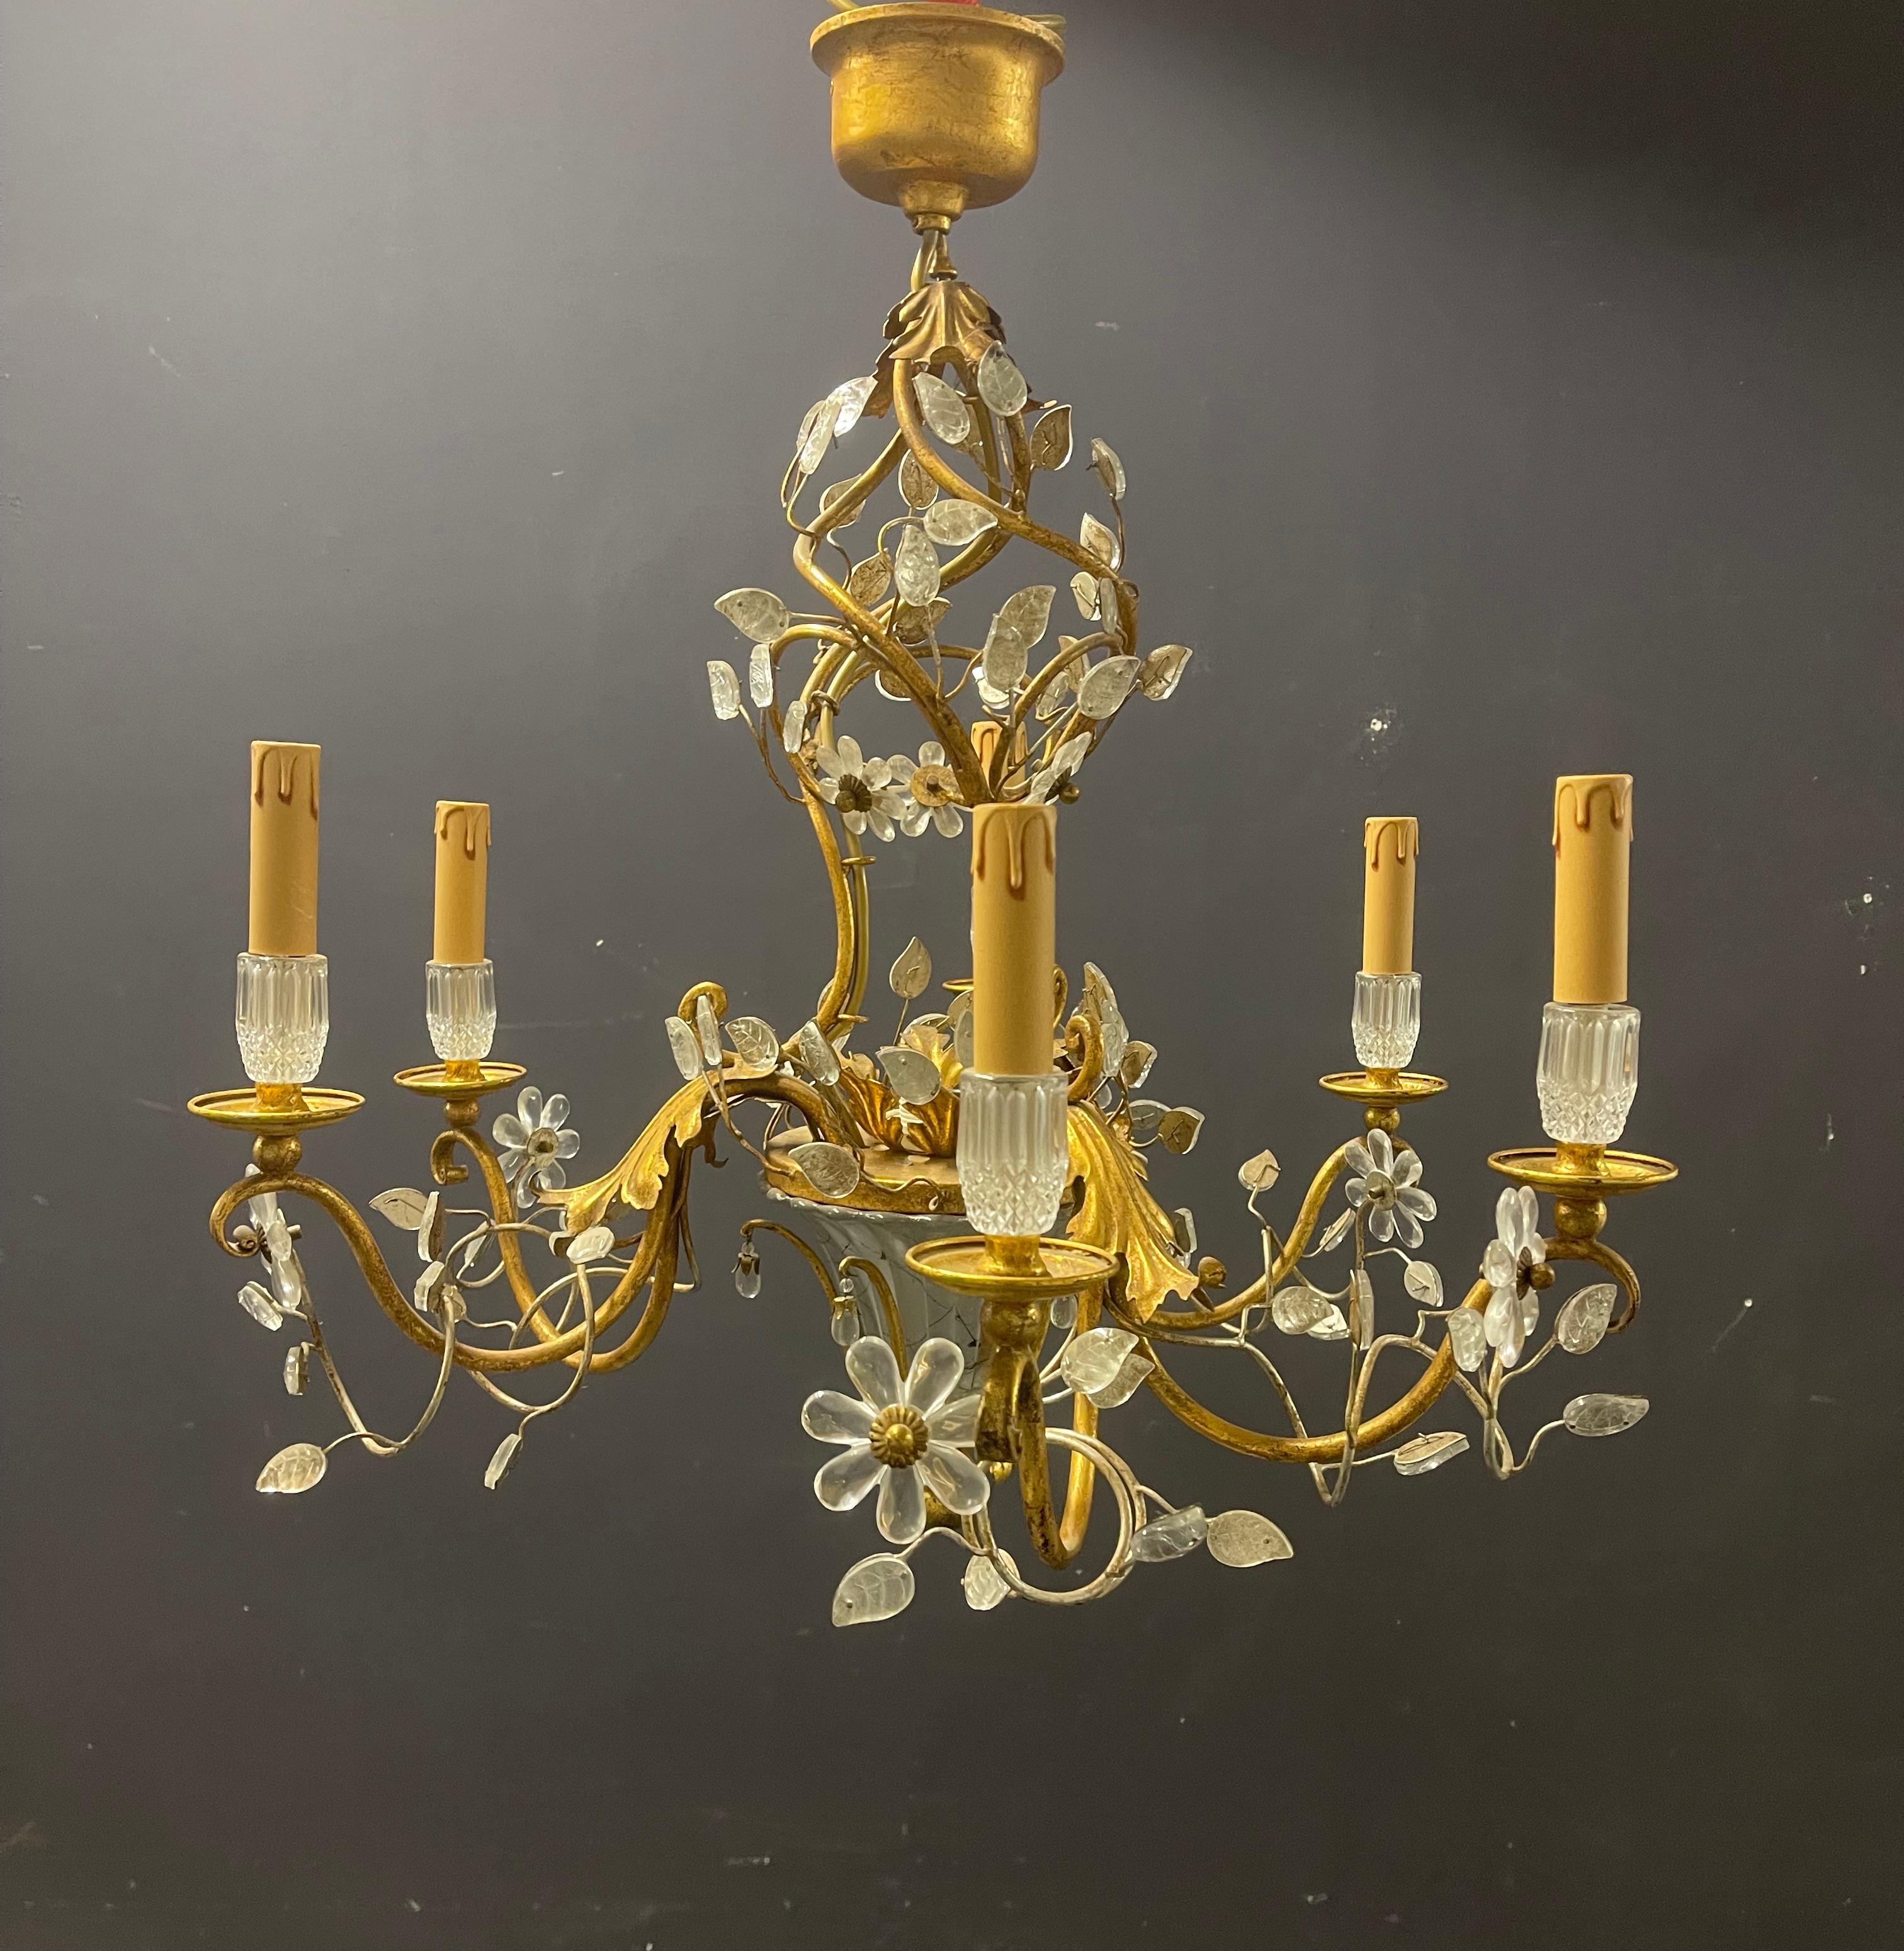 Wonderful maison bagues chrystal glass chandelier. Matching scones also available. We have a variation of maison bagues lights in stock.